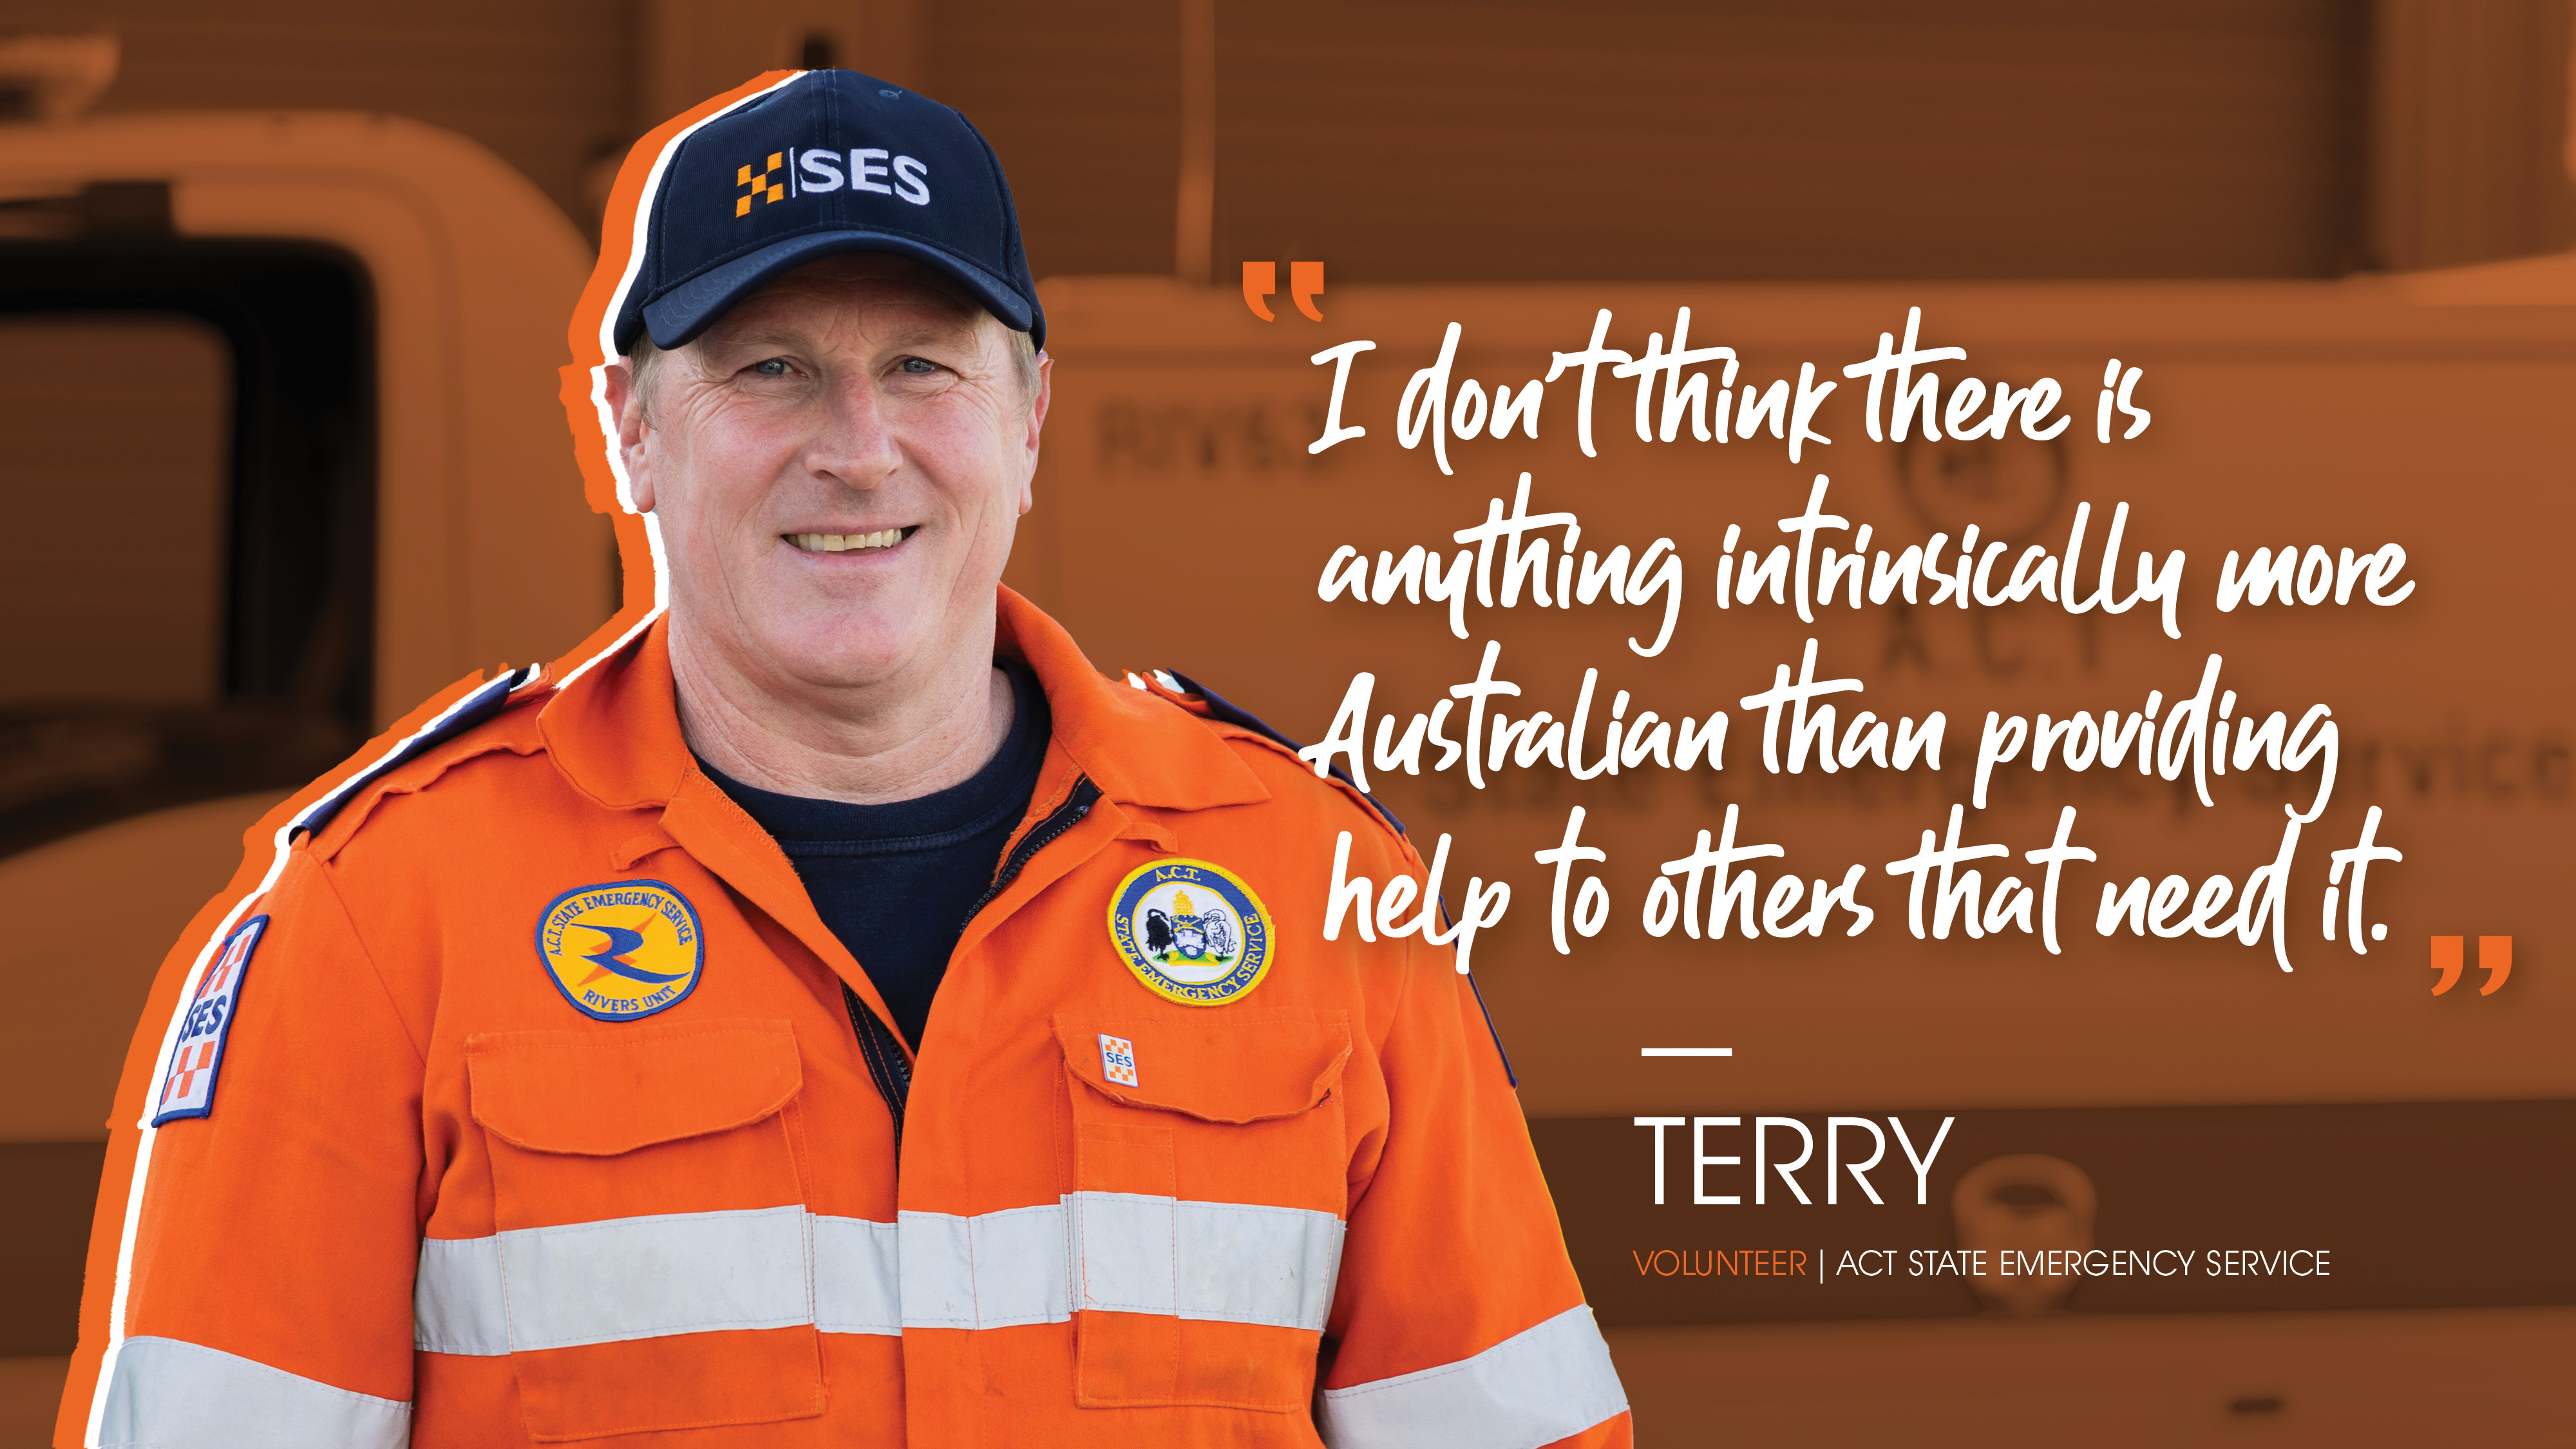 Profile photo of SES volunteer Terry with a pull quote from his story.